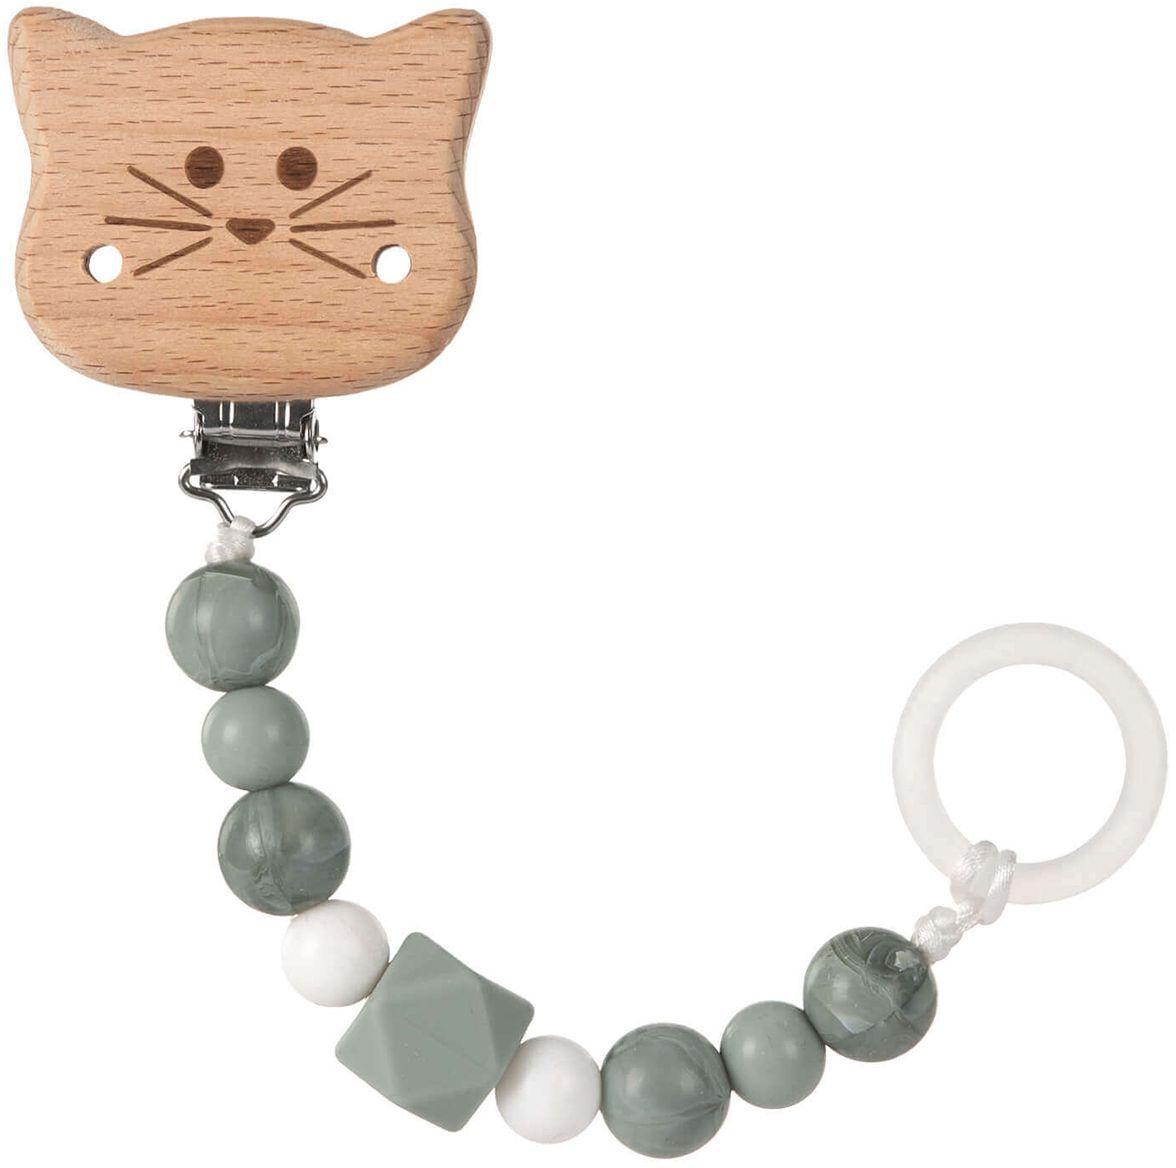 Lassig Soother Holder Wood/Silicone Little Chums-cat